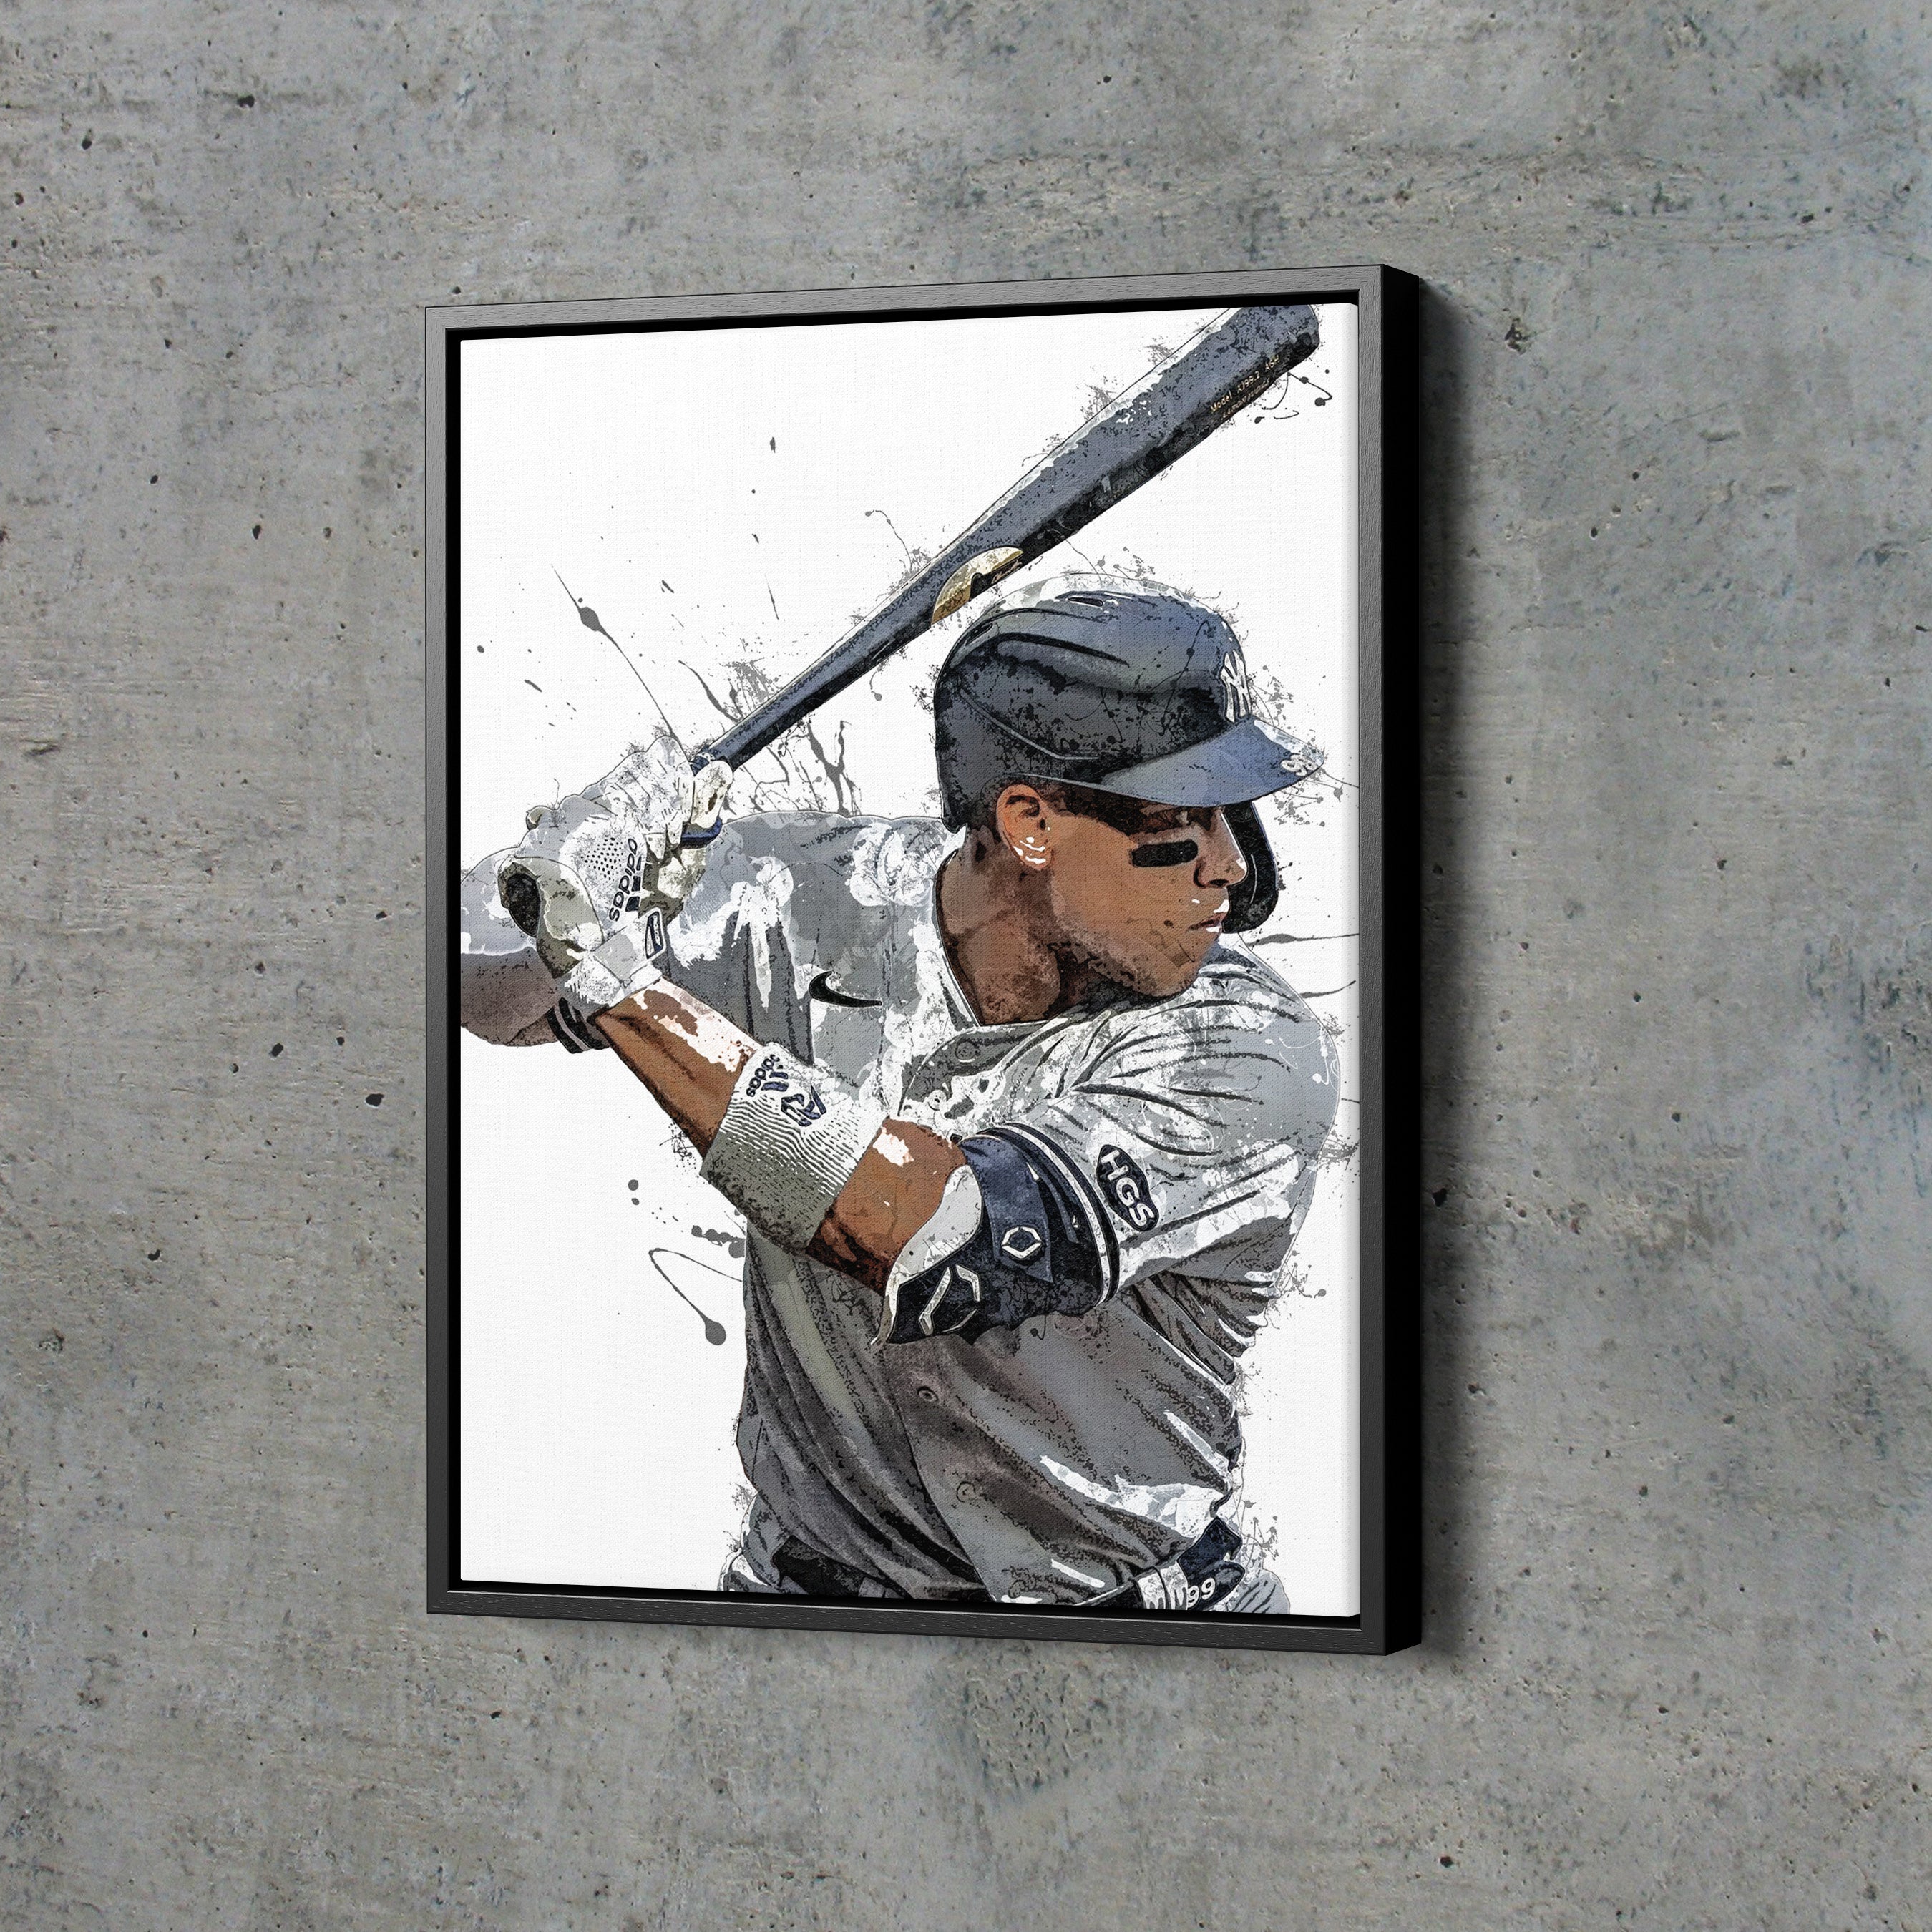 Poole Aaron Judge All Rise Sports Player Posters HD Printed Posters and Prints Oil Paintings on Canvas Home Decor Art Wall Art for Room Decoration